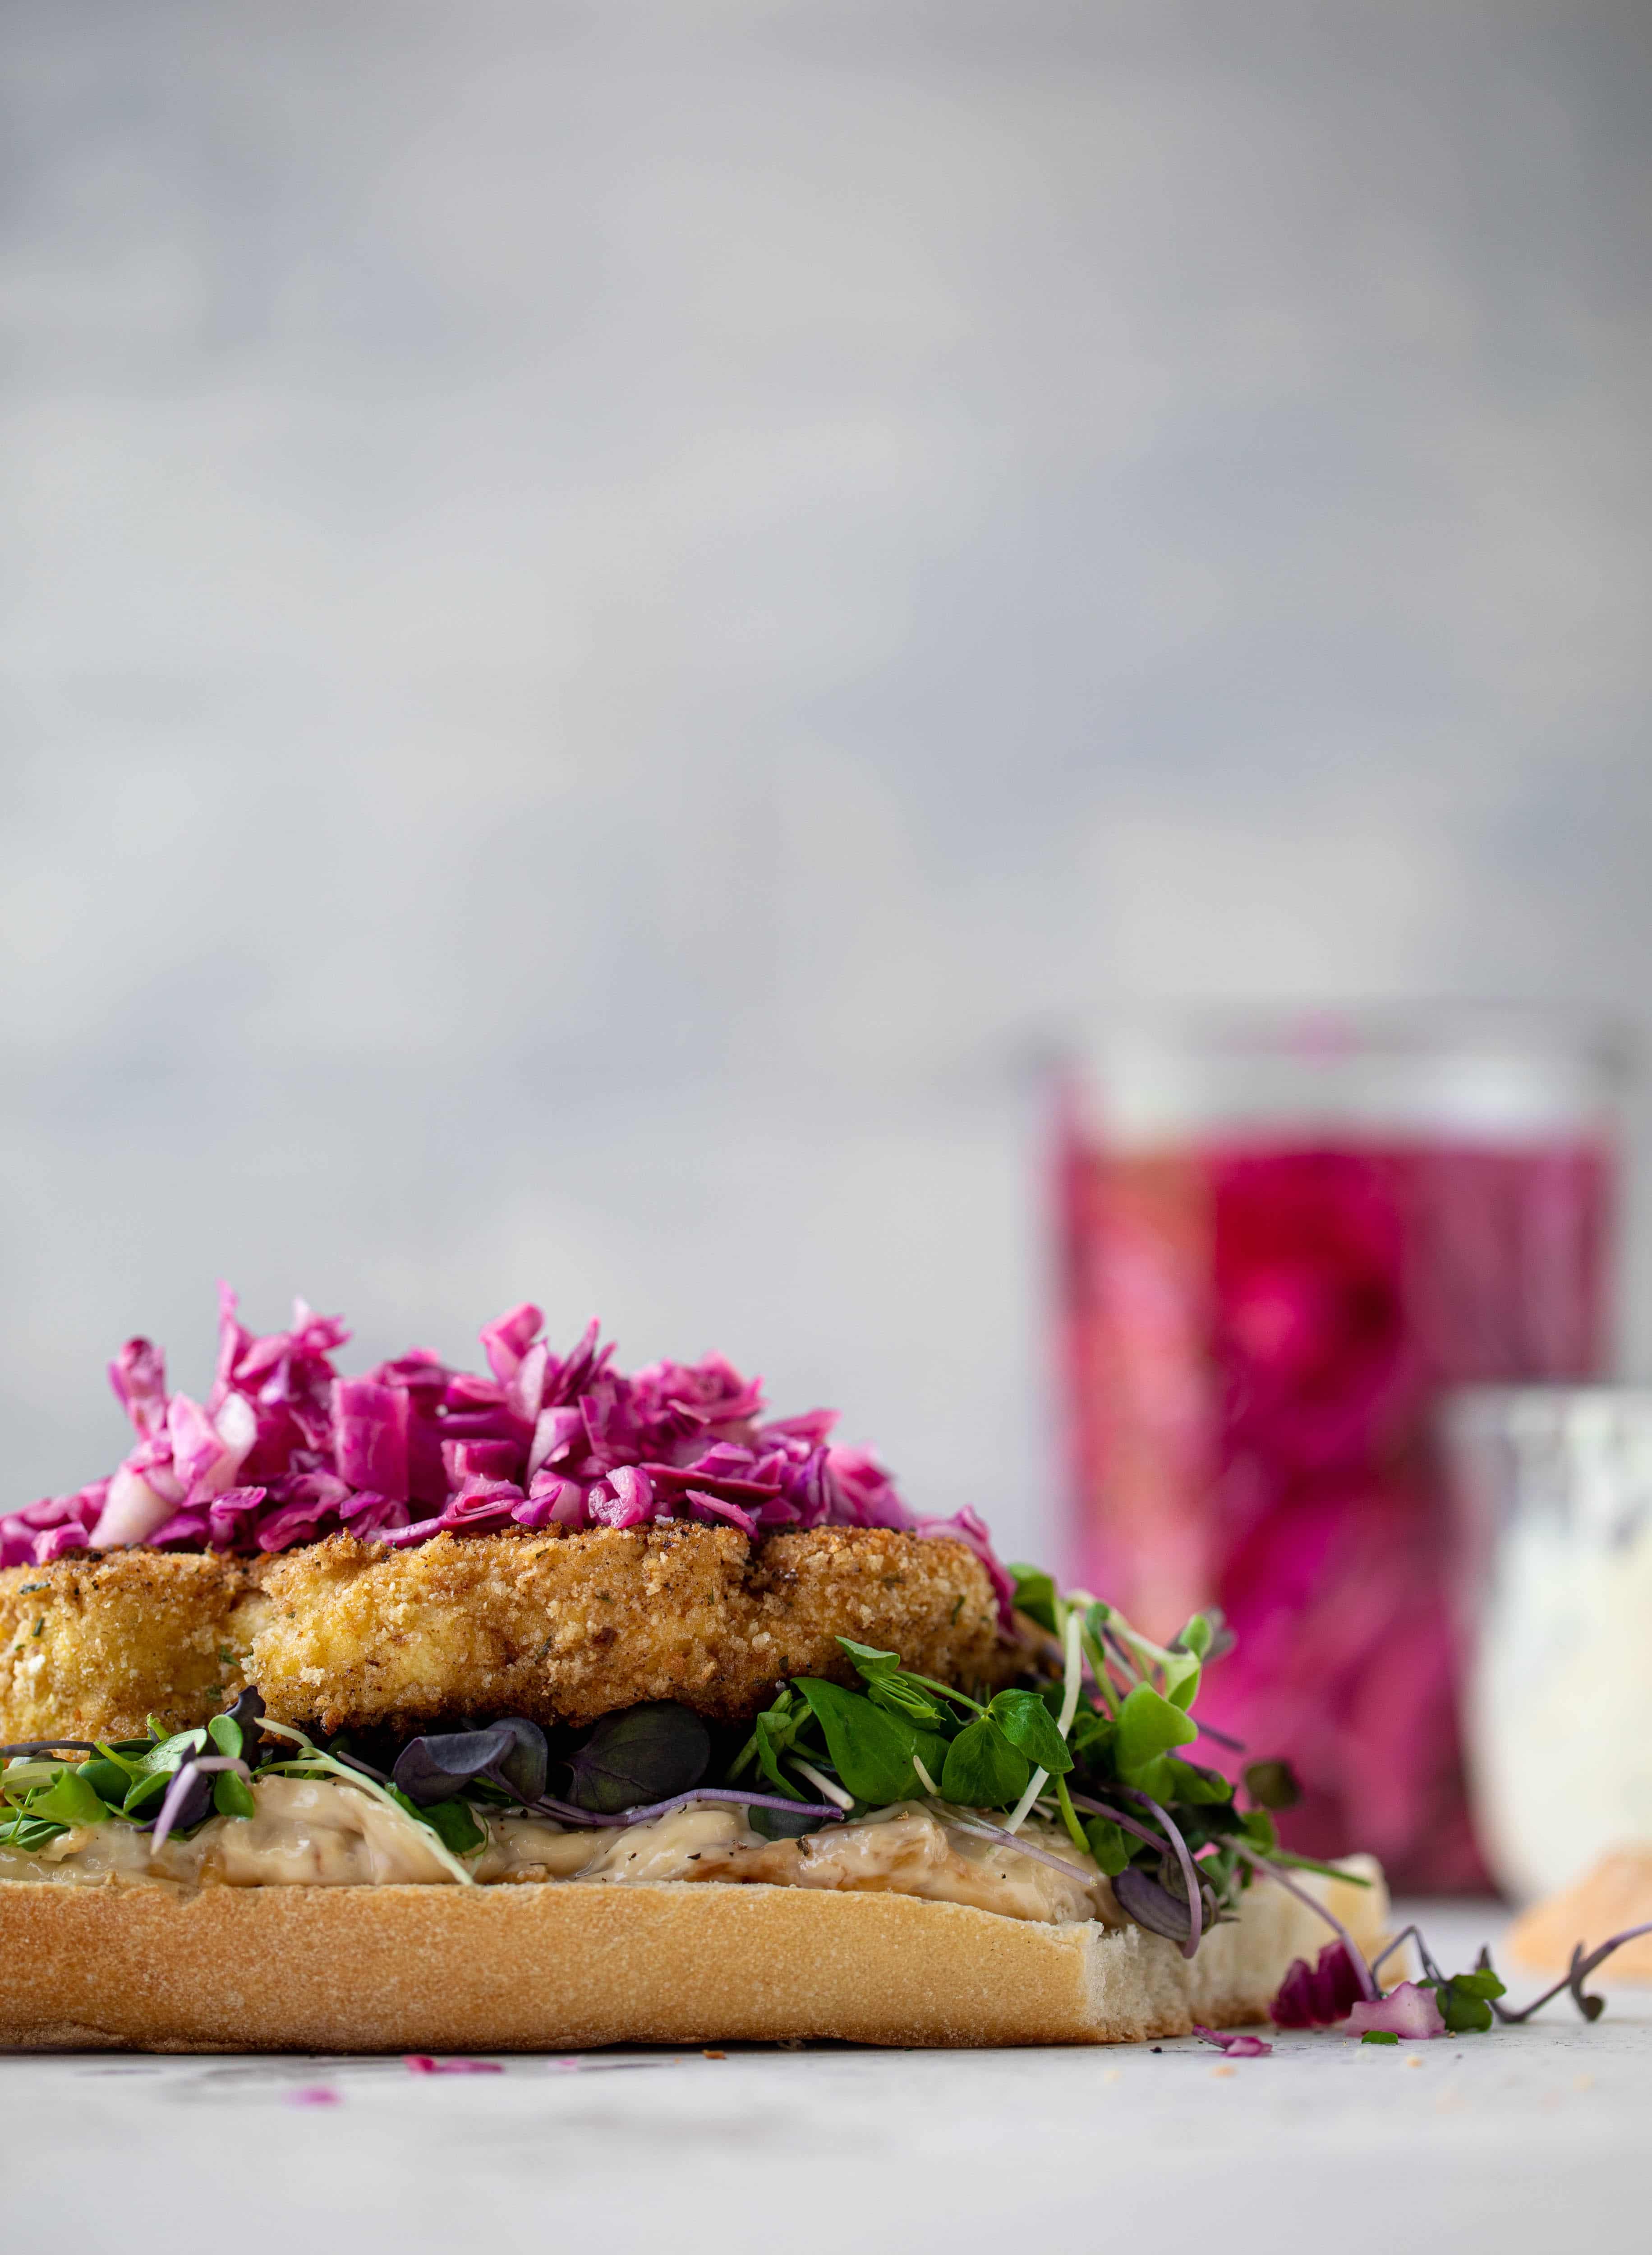 These cauliflower schnitzel sandwiches are full of flavor! Crispy cauliflower, caramelized onion mayo, pickled cabbage and microgreens. Delish!